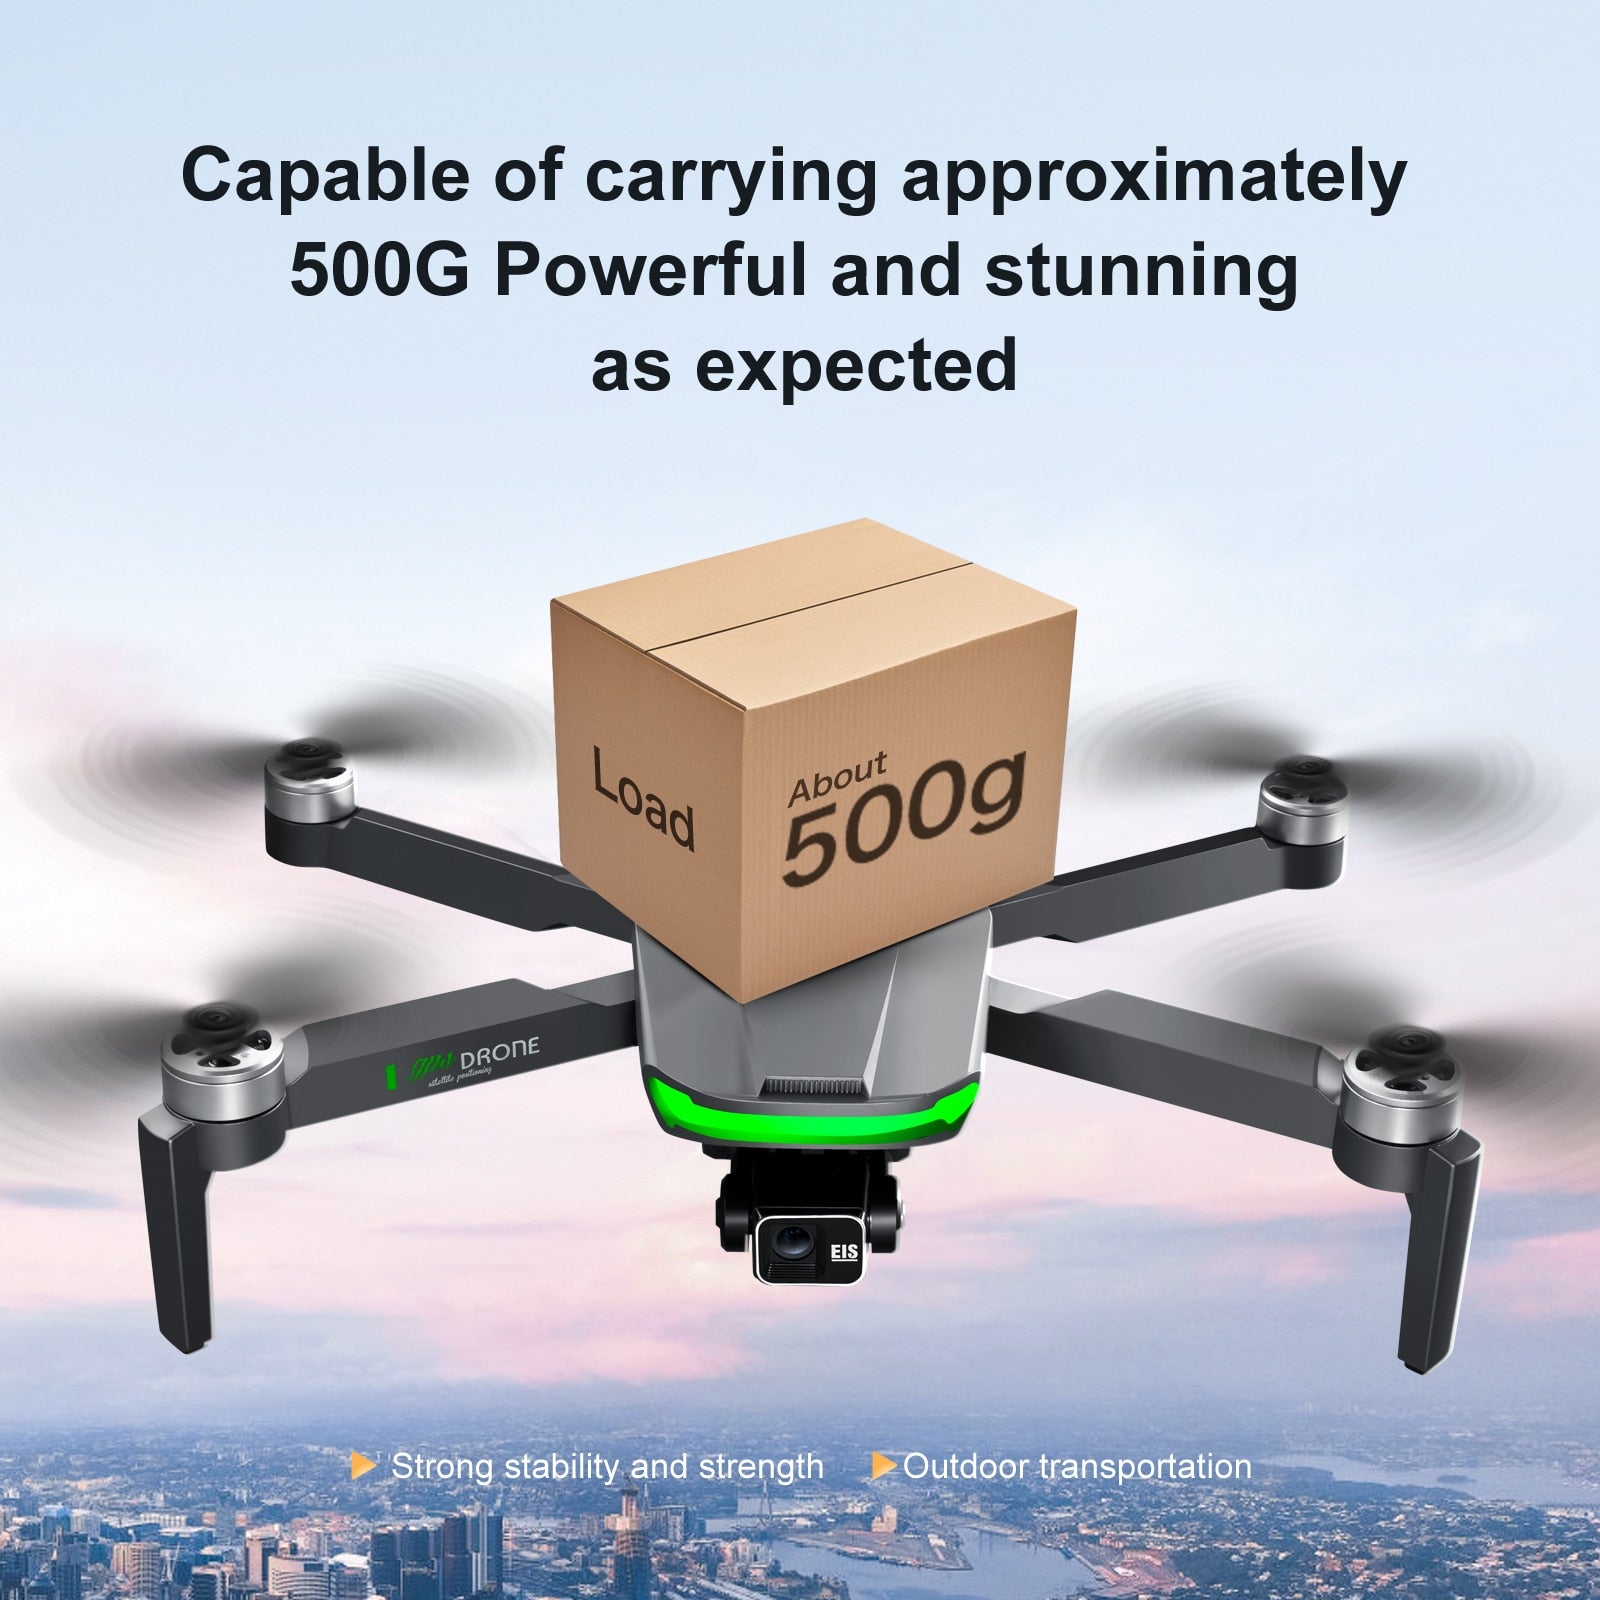 S155 Drone, Capable of carrying approximately 500g Powerful and stunning as expected E